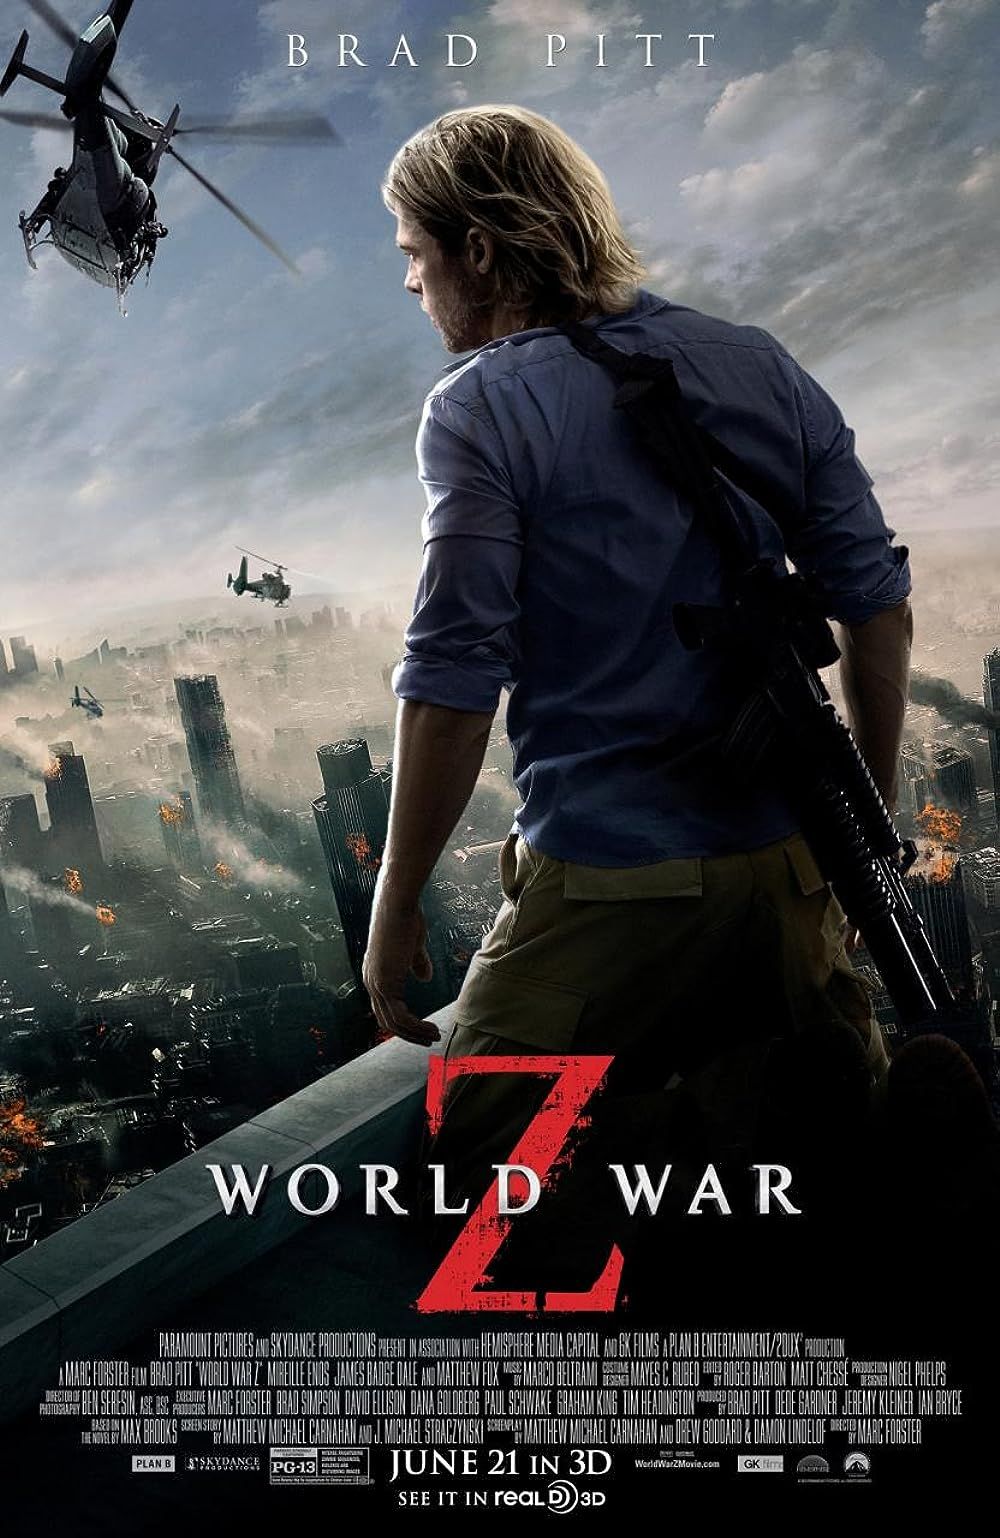 Brad Pitt as Gerry Lane on the poster of World War Z, staring at the chaos of the city from a roof